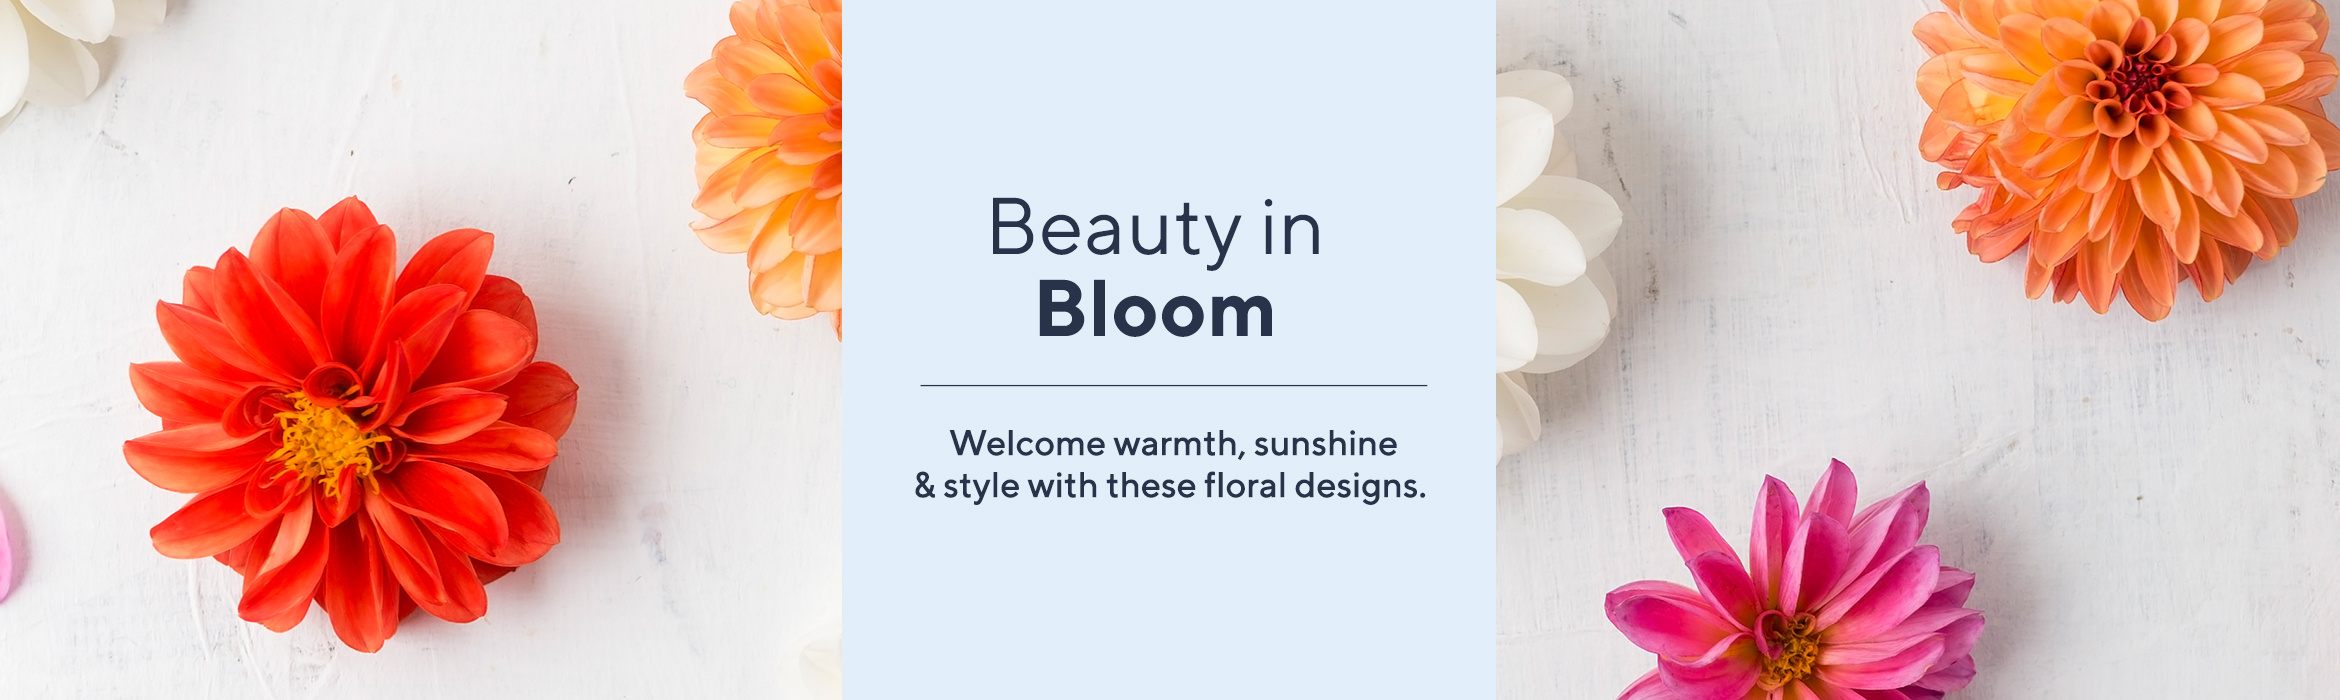 Beauty in Bloom  Welcome warmth, sunshine & style with these floral designs.